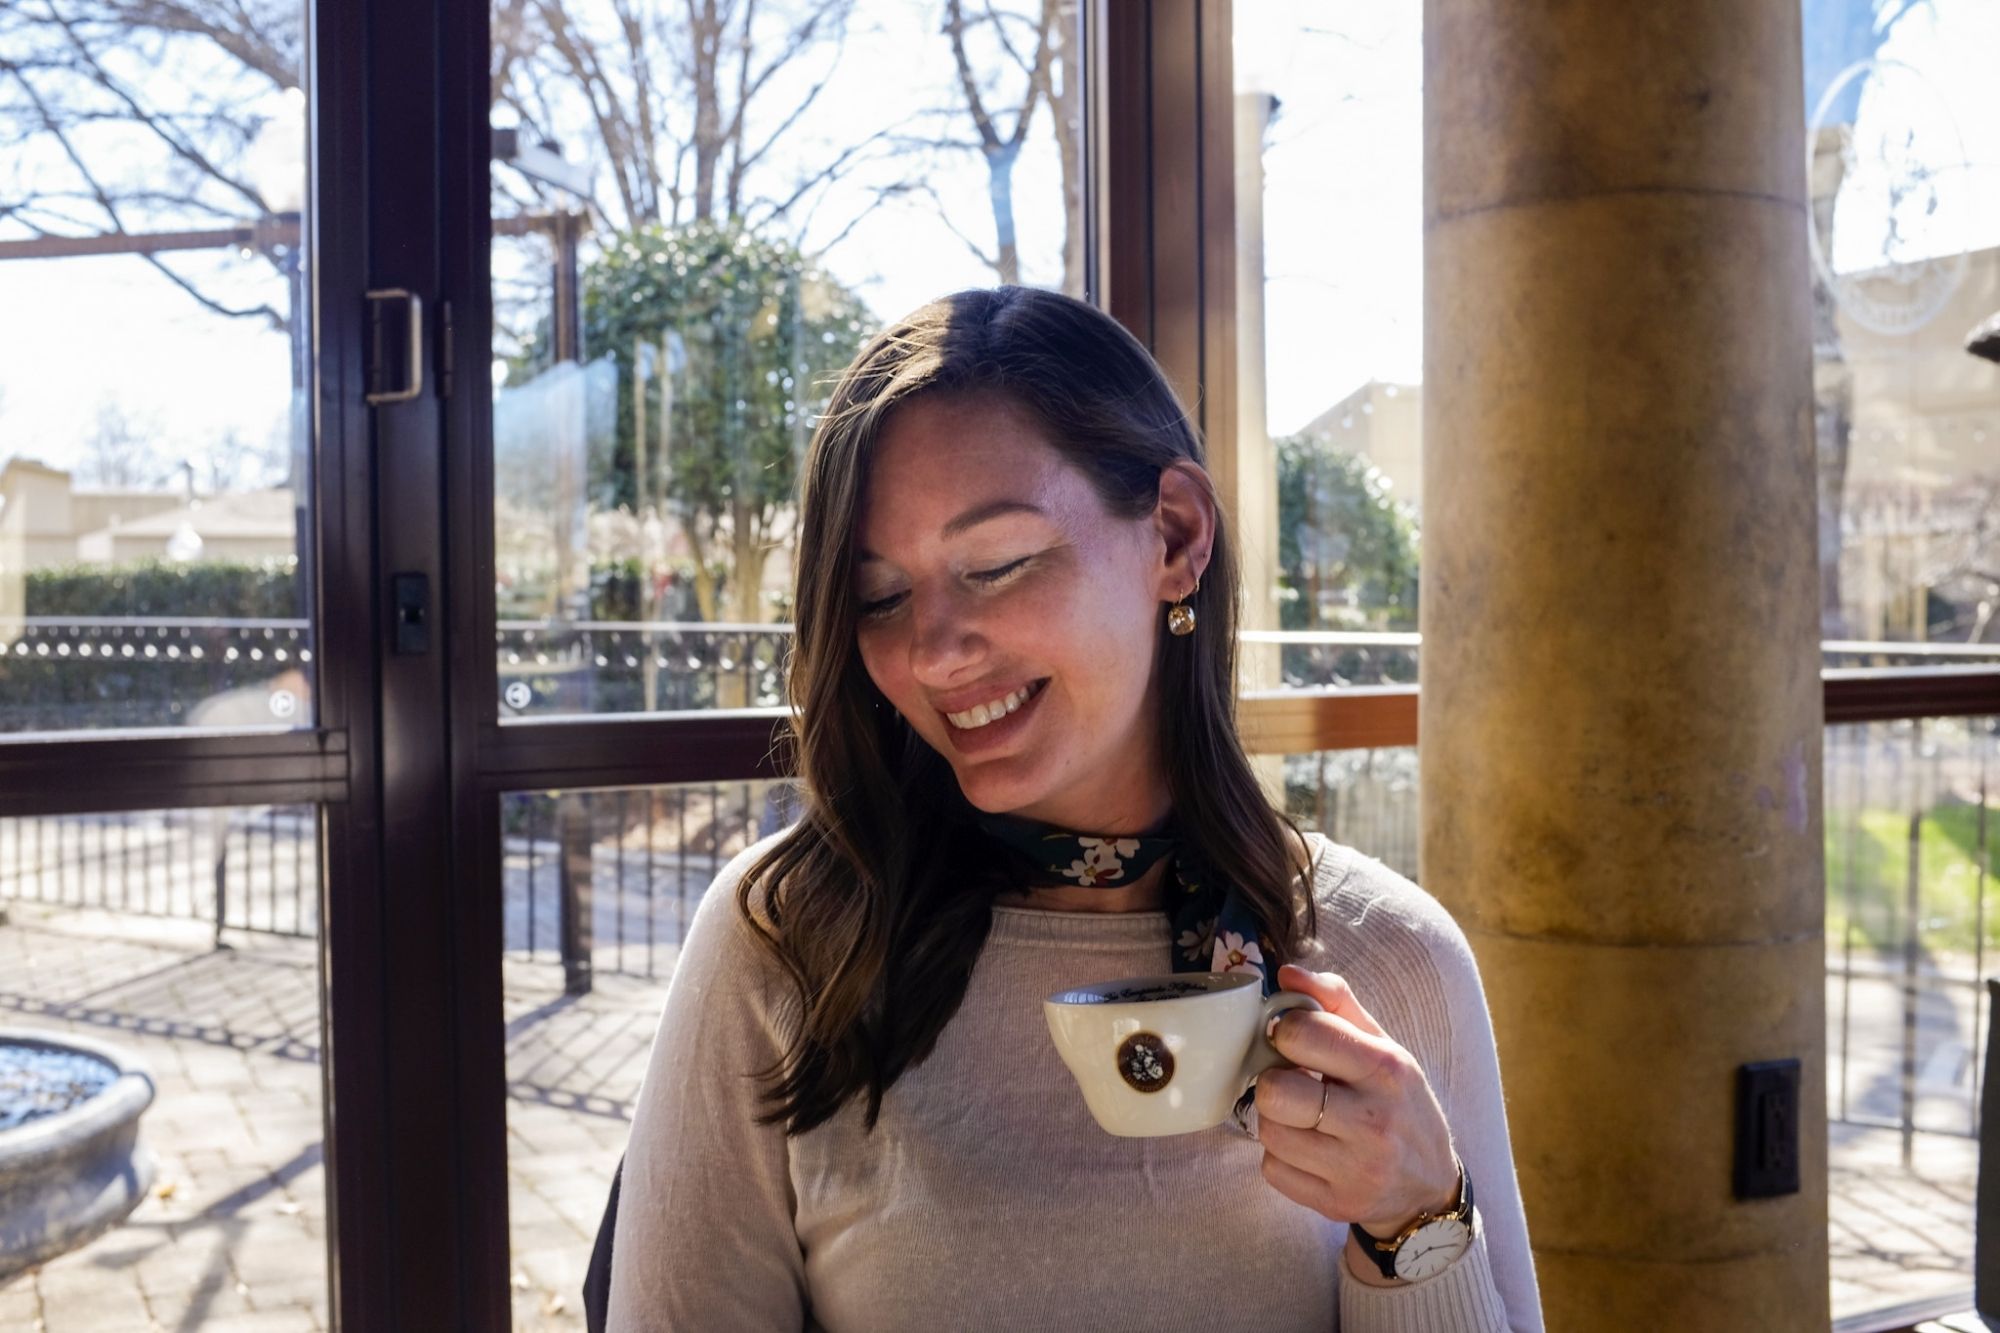 Alyssa holds a coffee and smiles while at Cafe Intermezzo